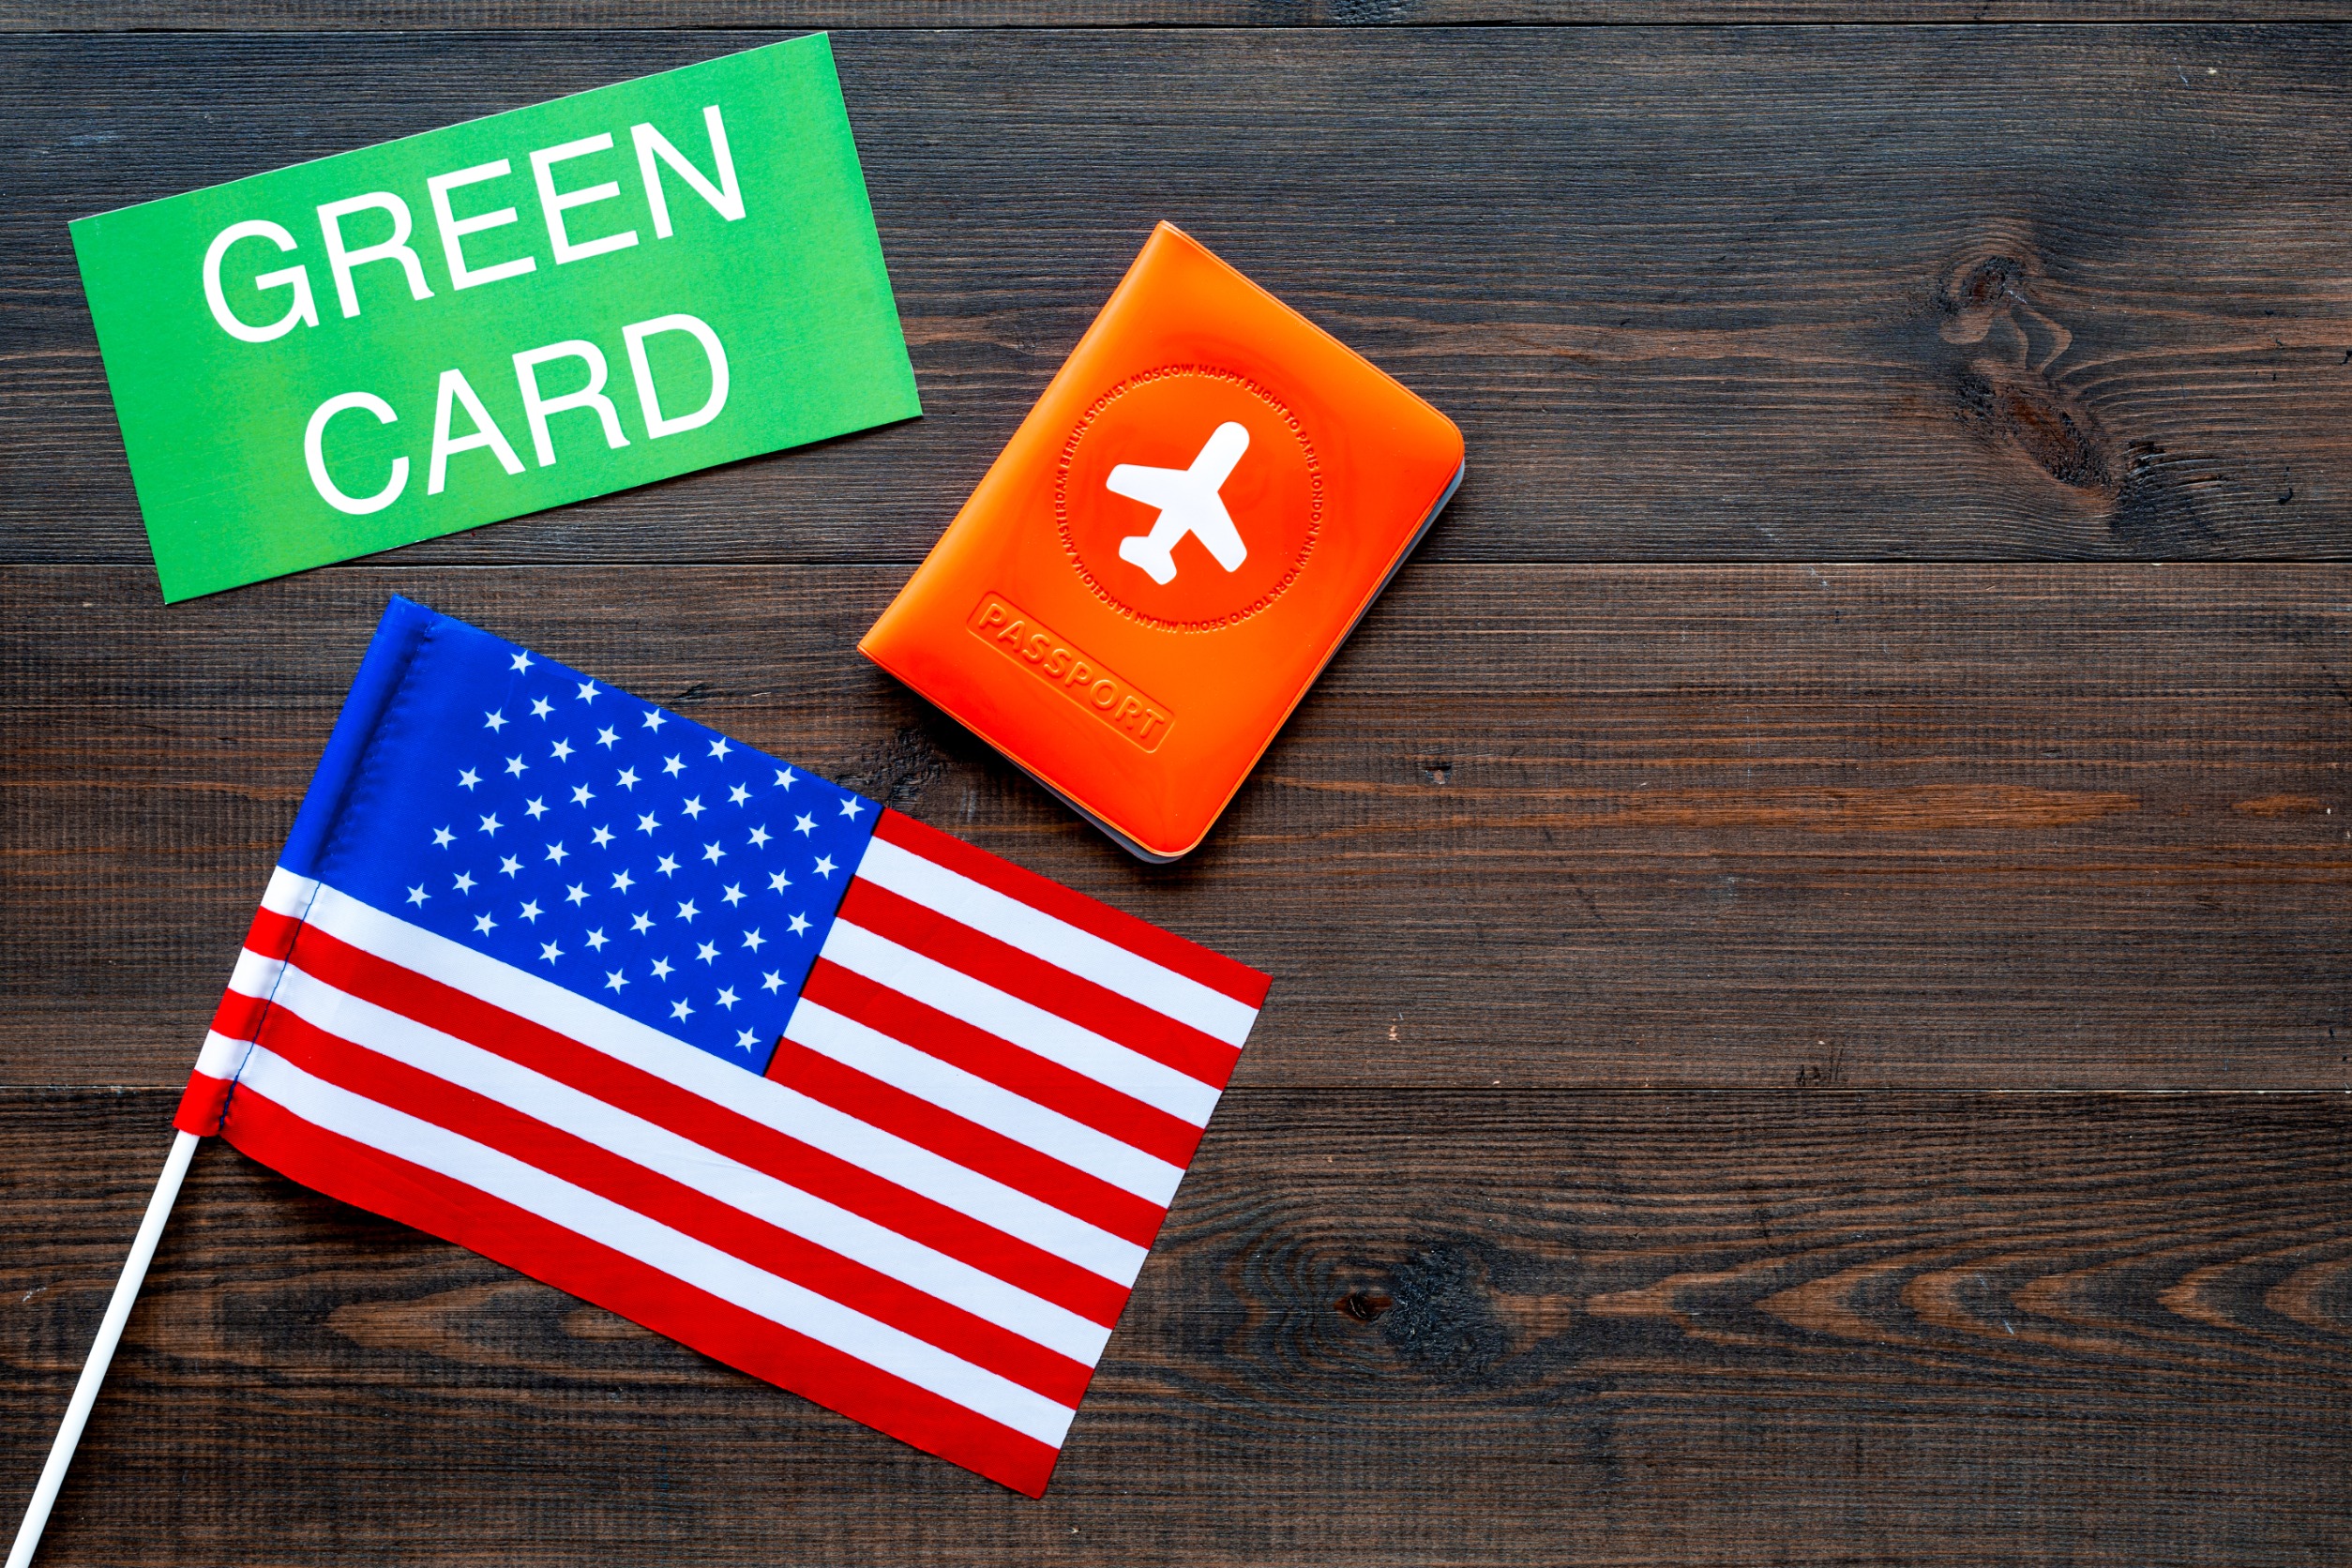 US Increases Fees for H-1B and Green Card Applications3